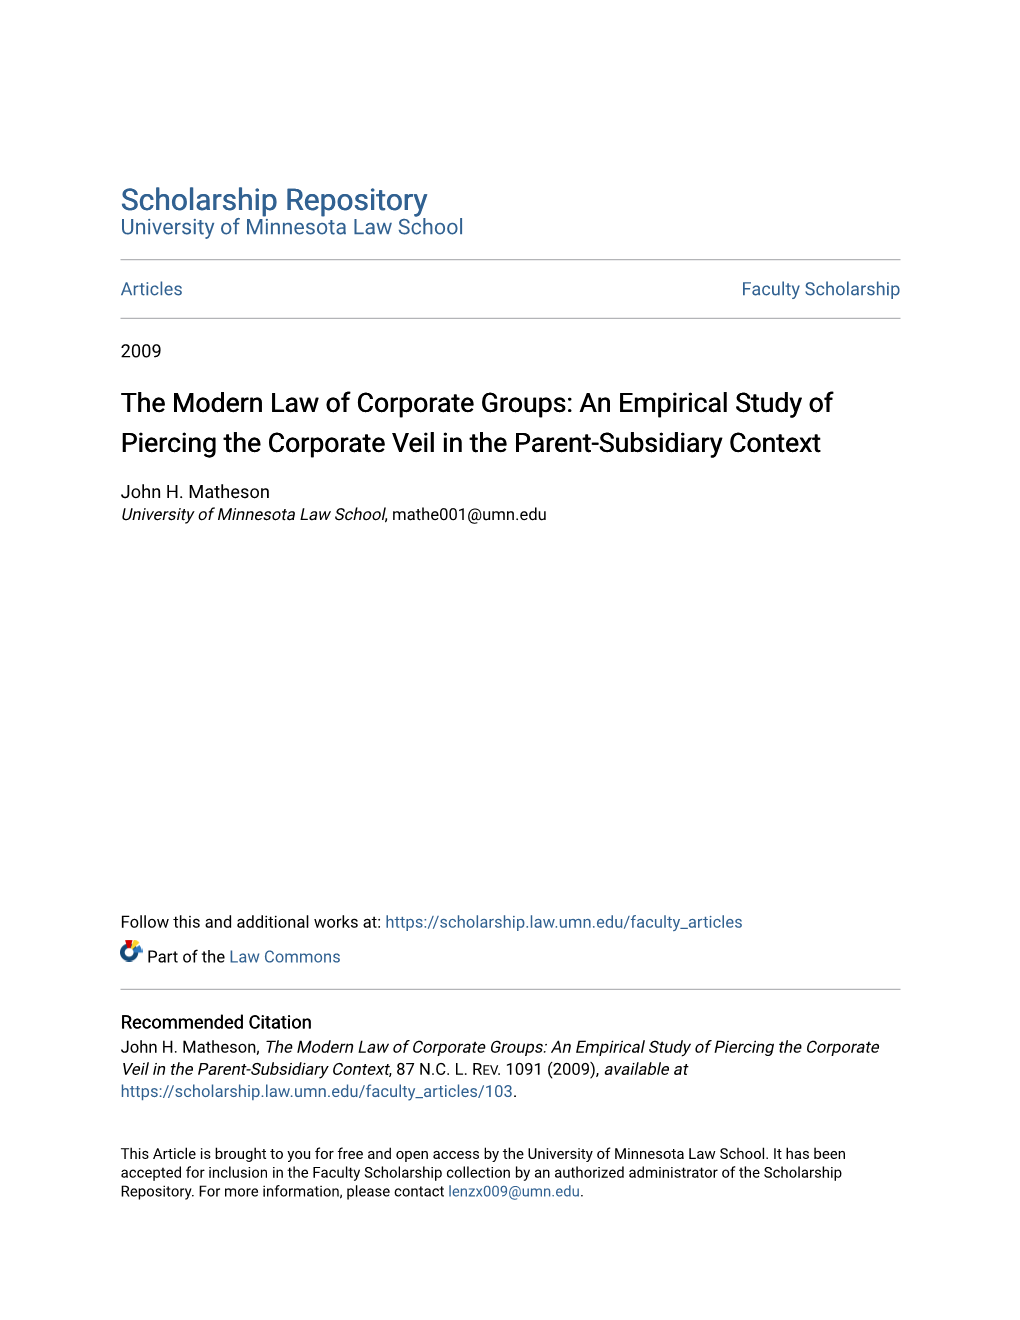 The Modern Law of Corporate Groups: an Empirical Study of Piercing the Corporate Veil in the Parent-Subsidiary Context